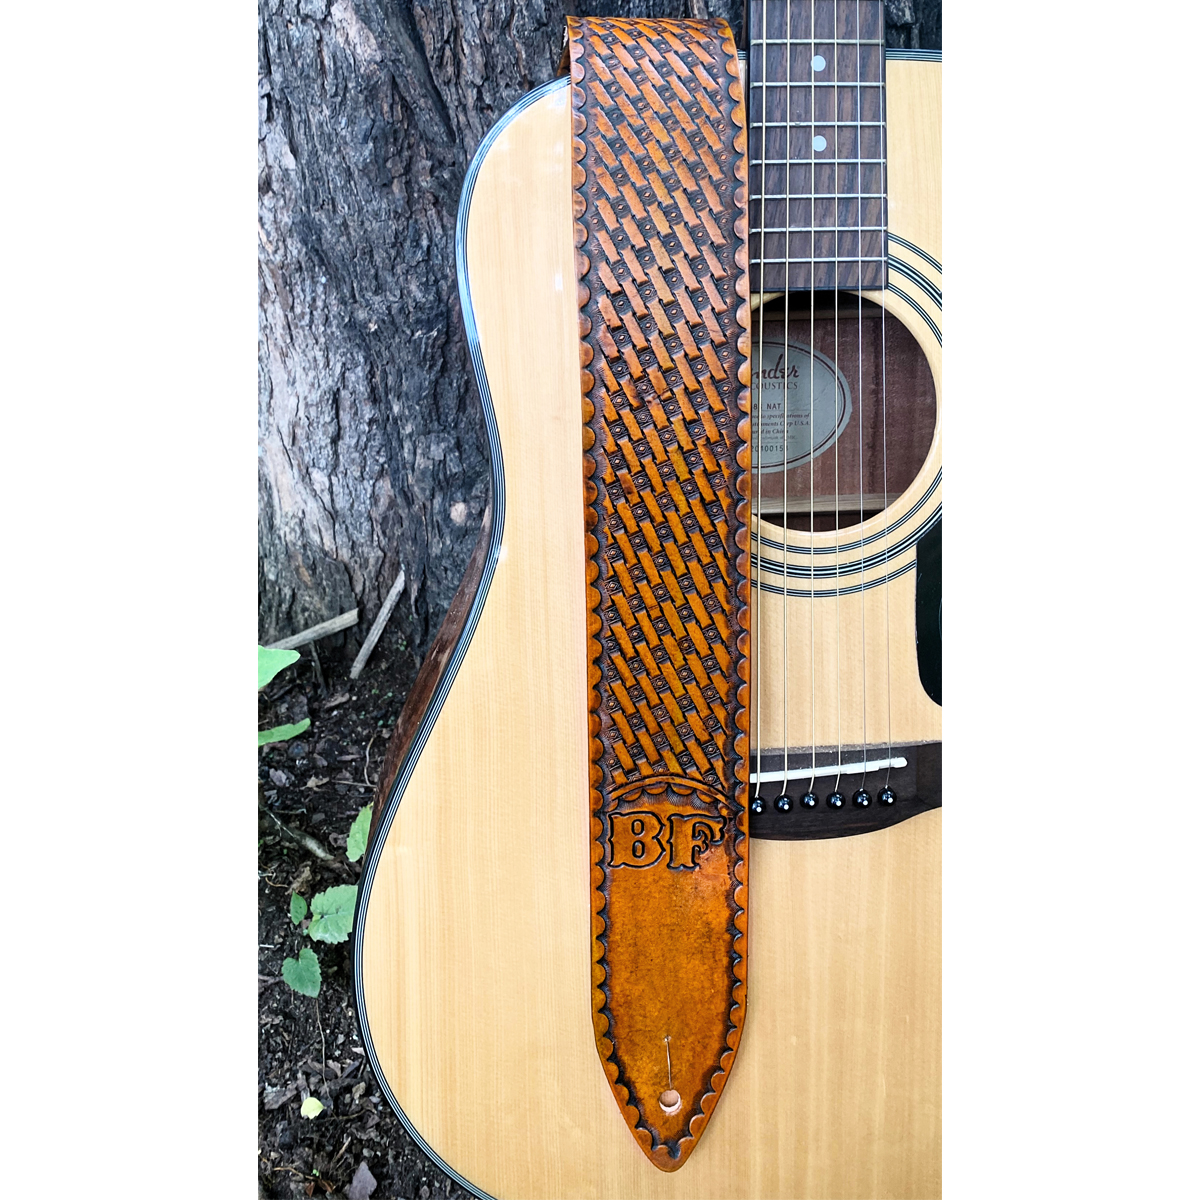 Western Tooled Guitar Strap